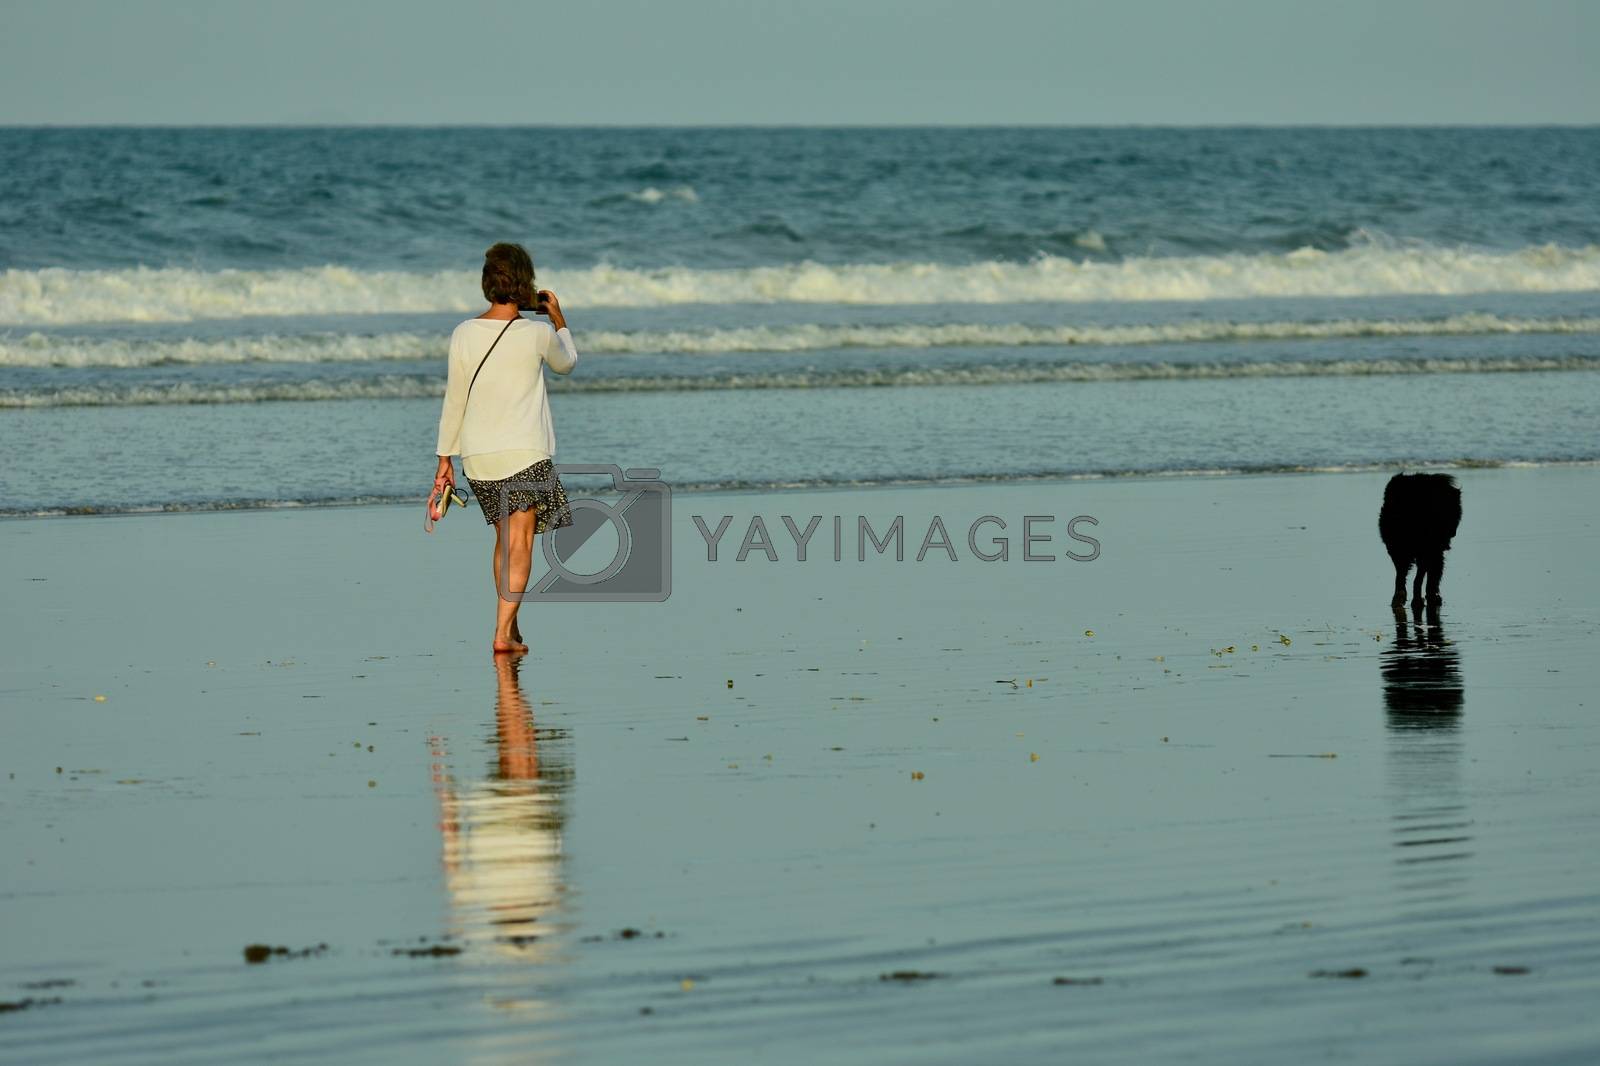 Royalty free image of Auckland, New Zealand - Mar 2020. An unidentified young woman enjoying a walk on the beach, with her dog exploring the beach. by Marshalkina